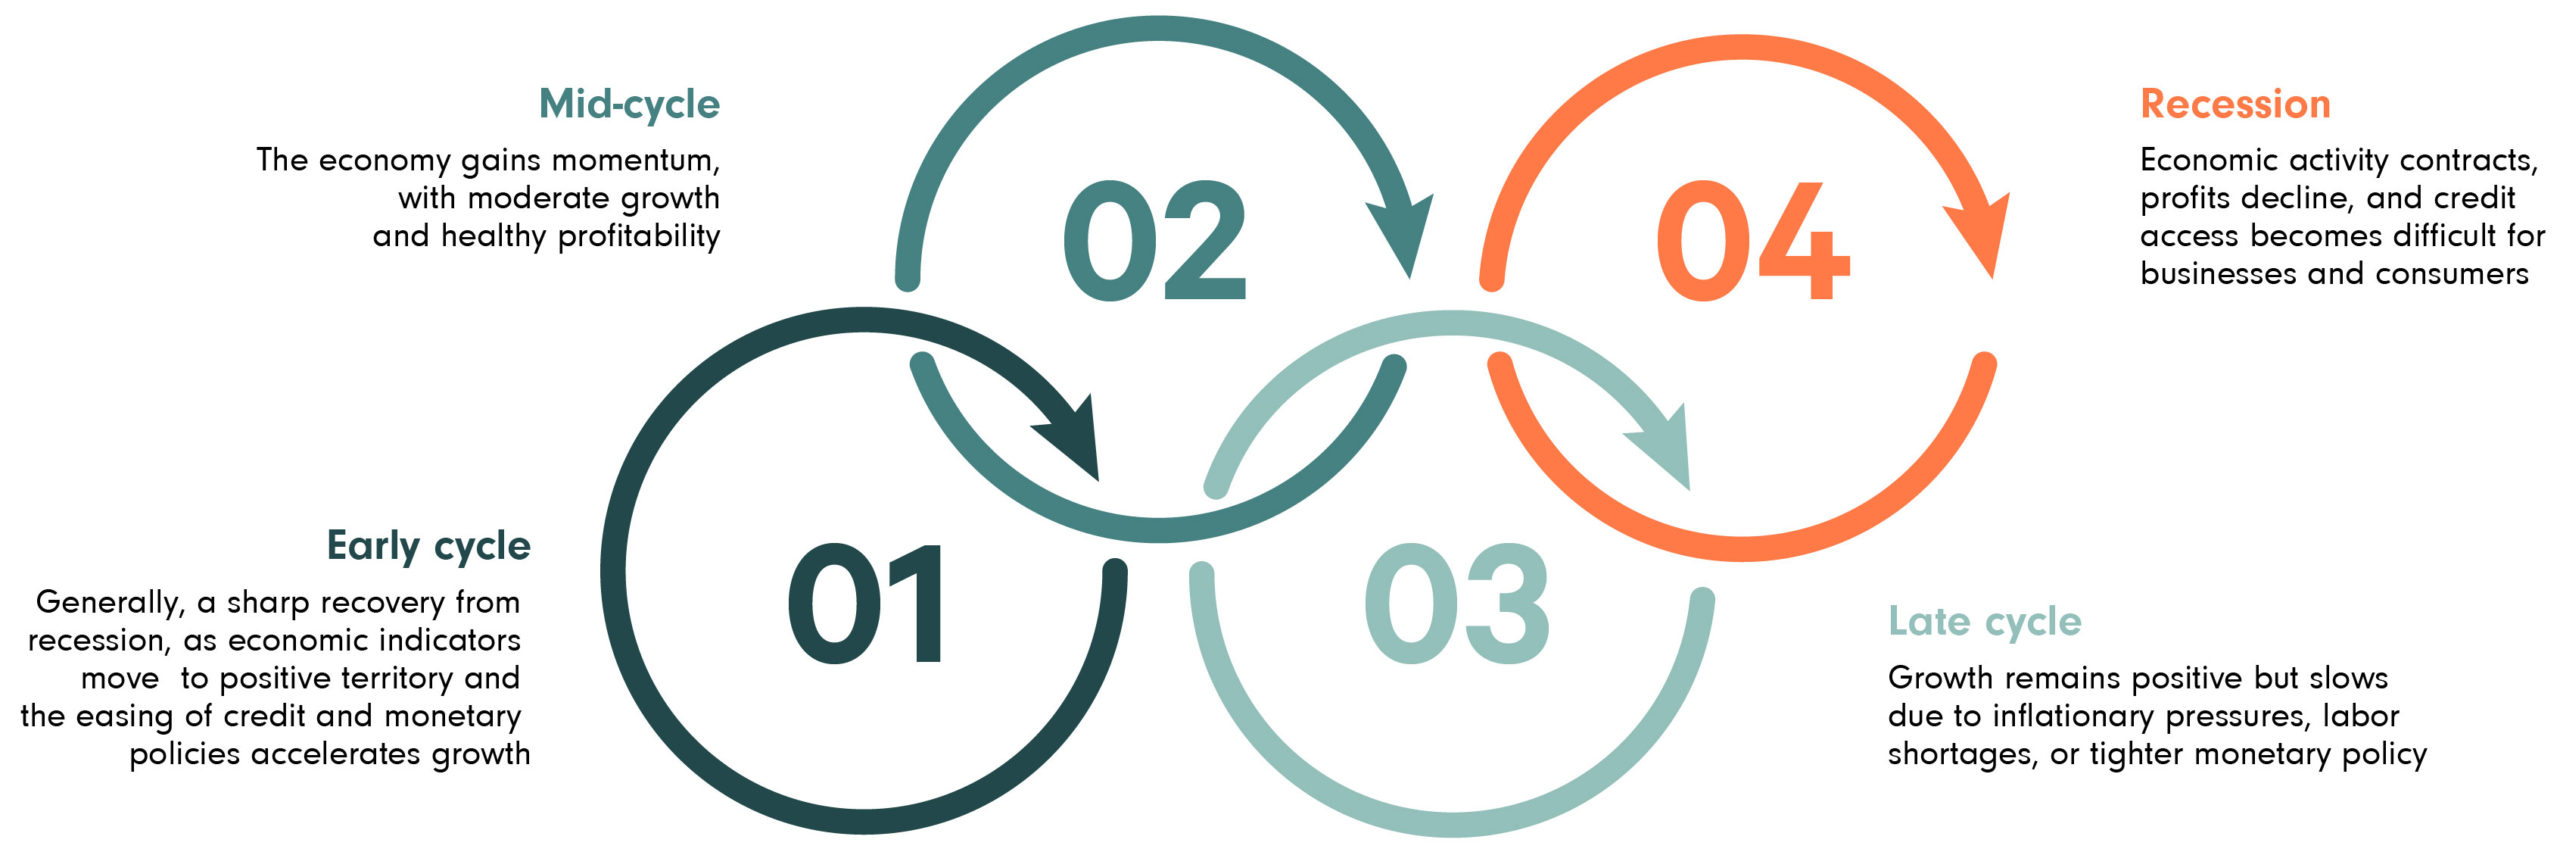 graphic describing the typical four business cycles